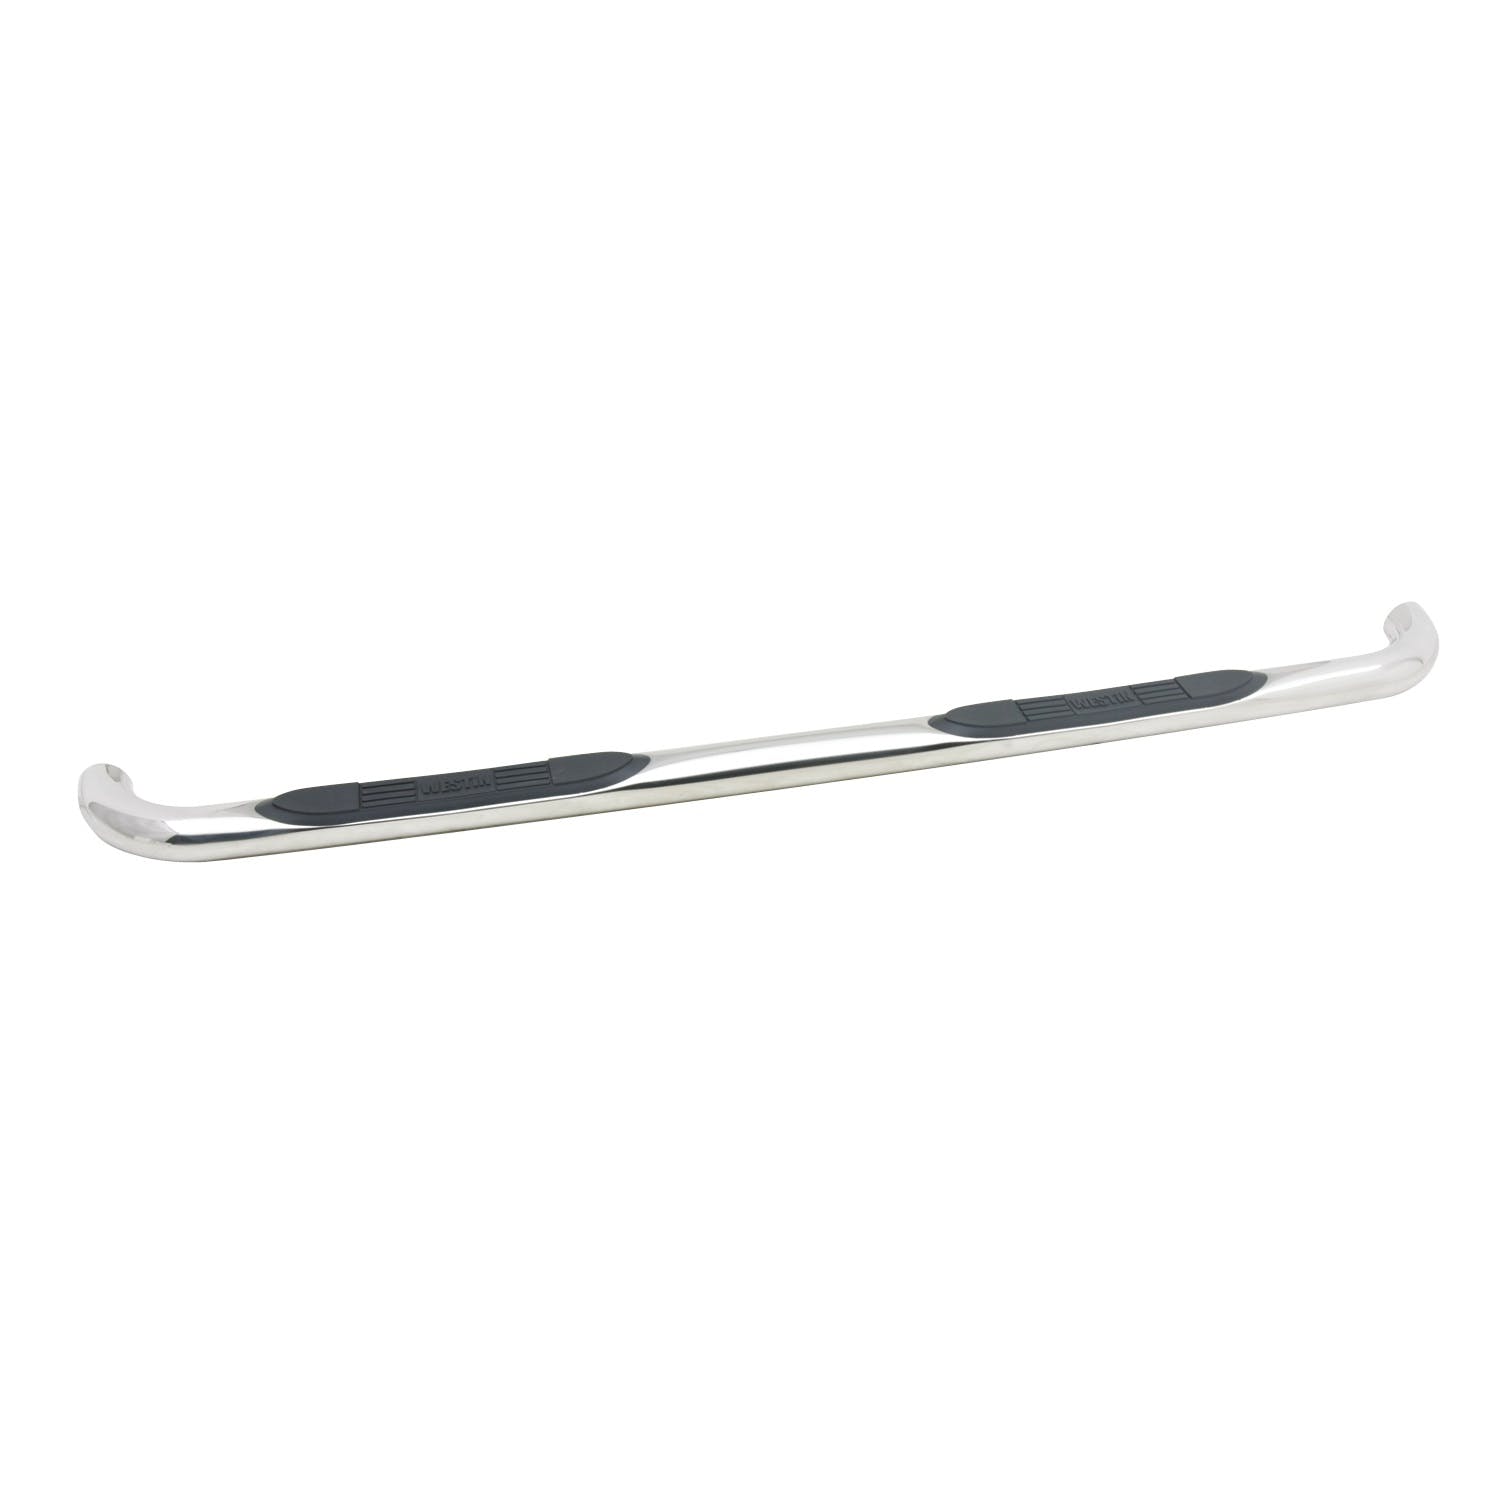 Westin Automotive 23-3560 E-Series 3 Nerf Step Bars Stainless Steel